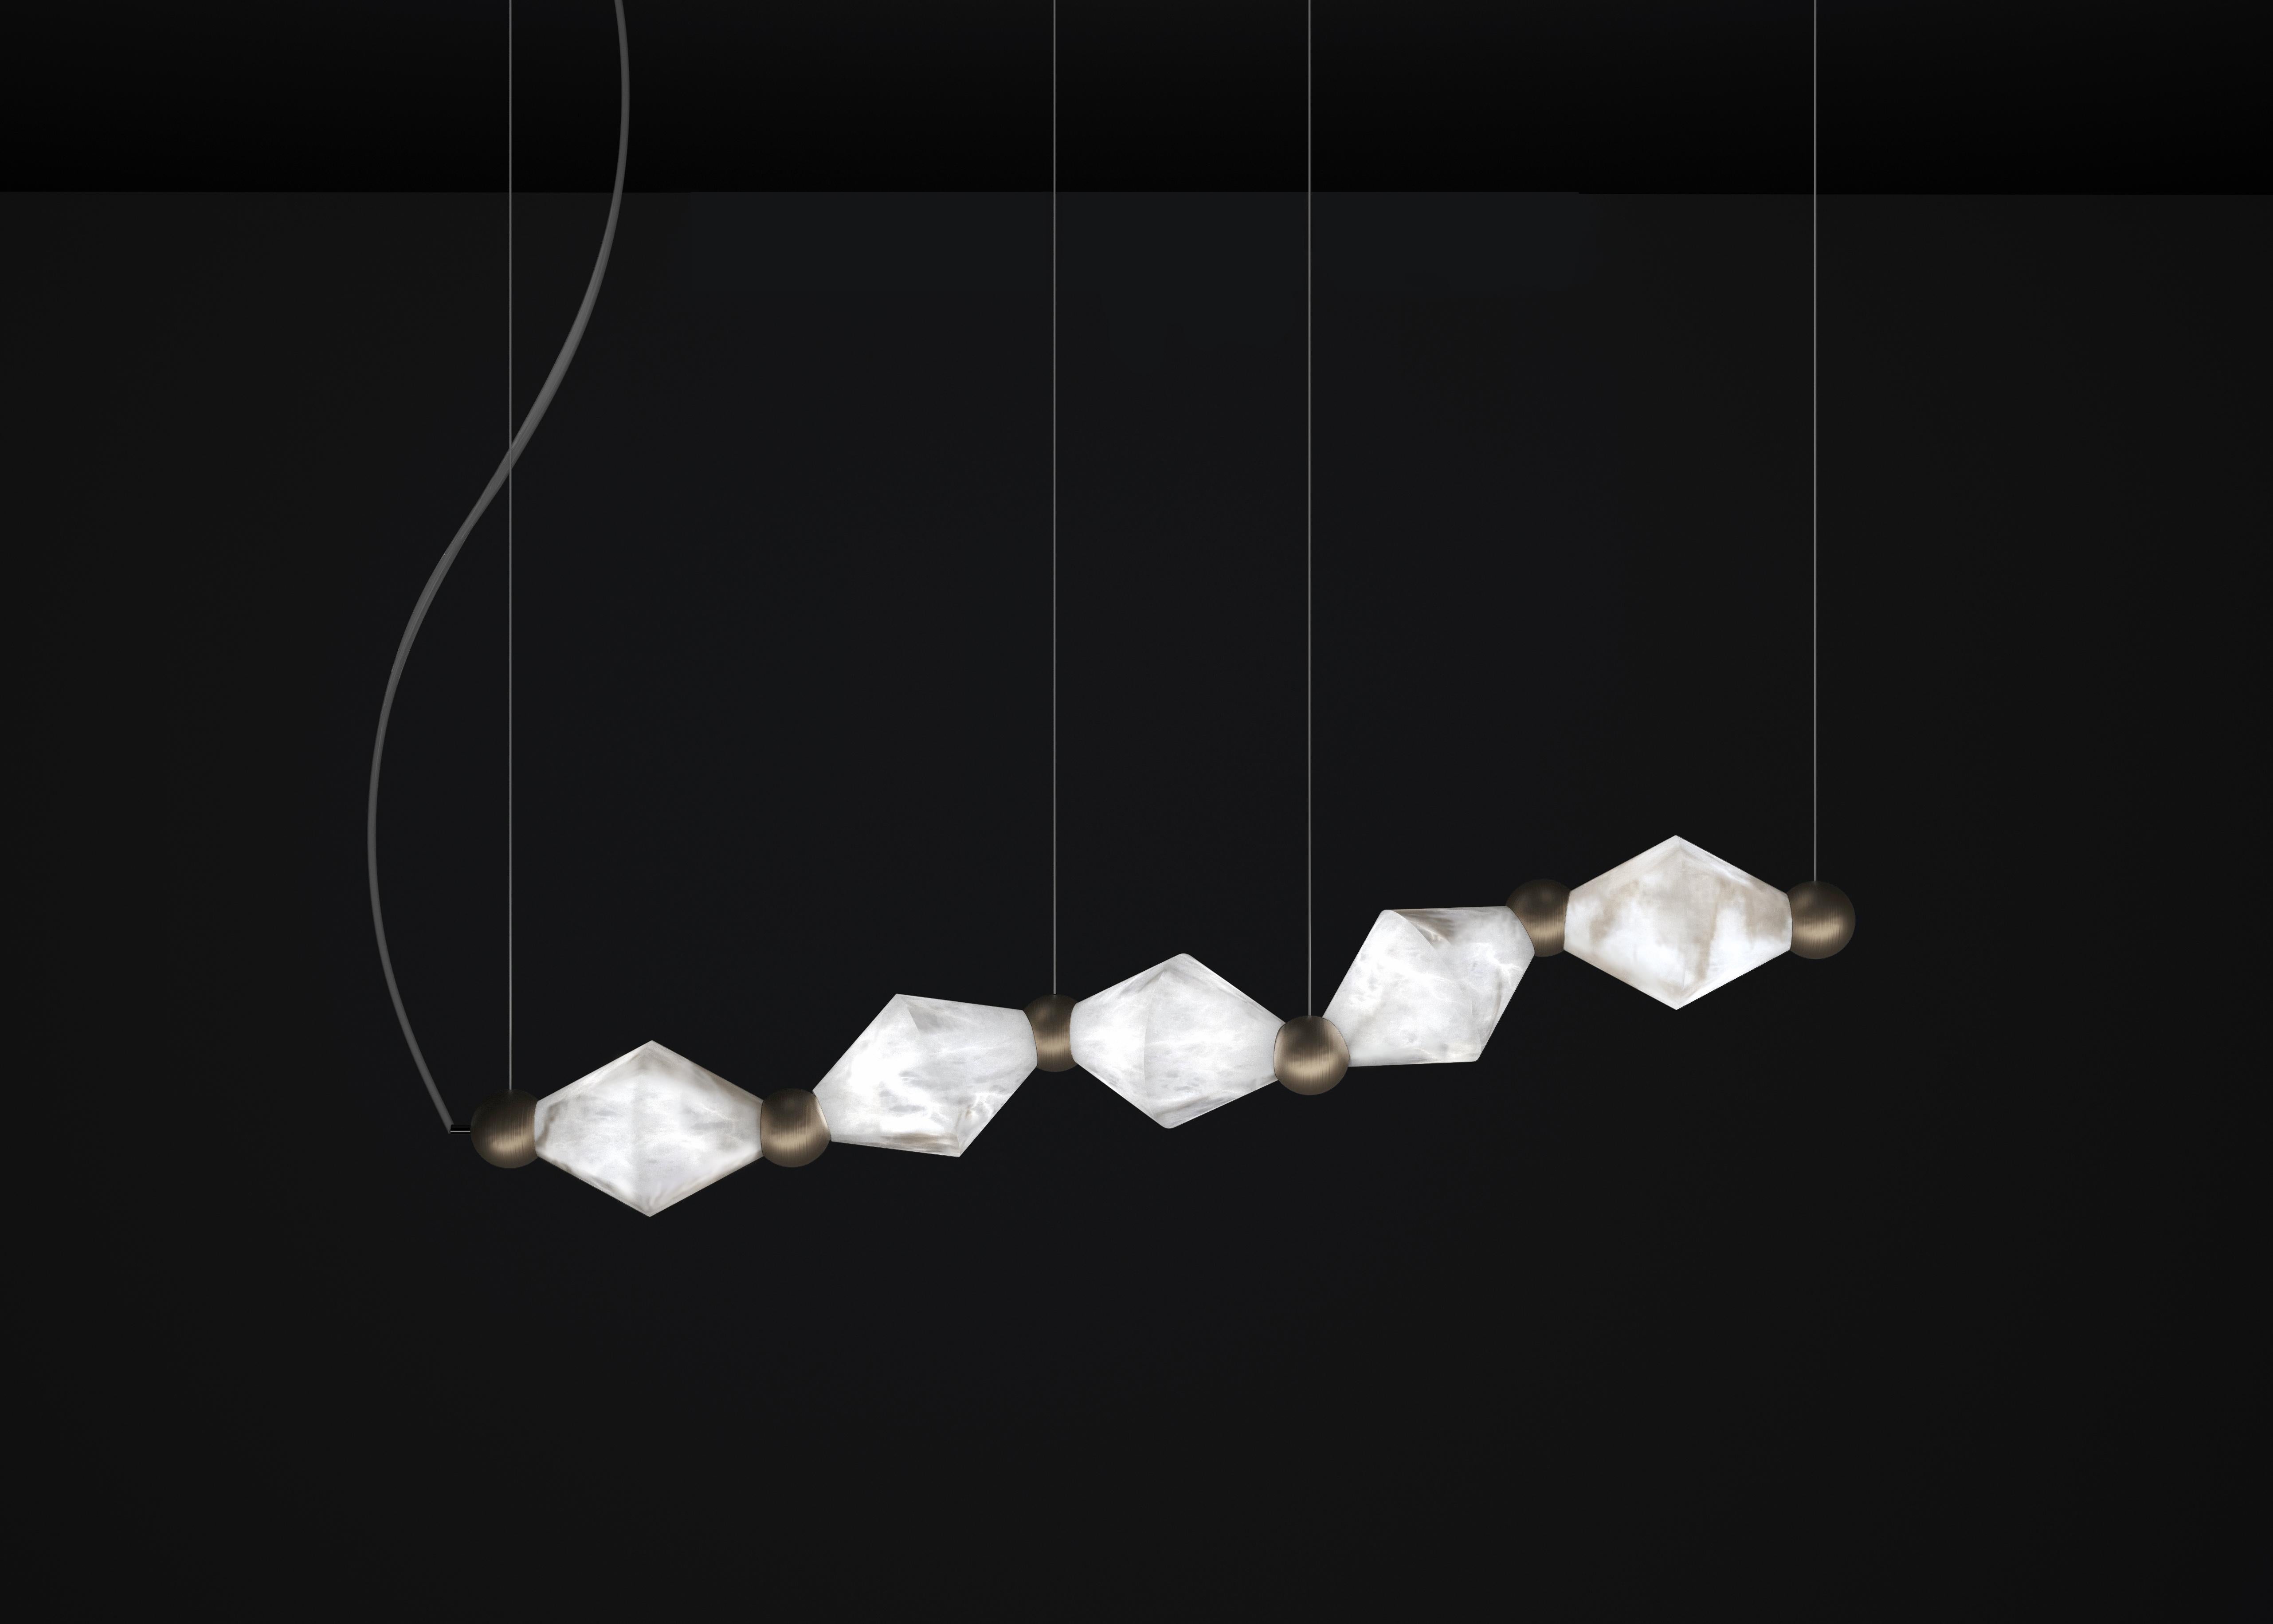 Chronos Brushed Burnished Metal Pendant Lamp by Alabastro Italiano
Dimensions: D 21 x W 142 x H 31 cm.
Materials: White alabaster and metal.

Available in different finishes: Shiny Silver, Bronze, Brushed Brass, Ruggine of Florence, Brushed